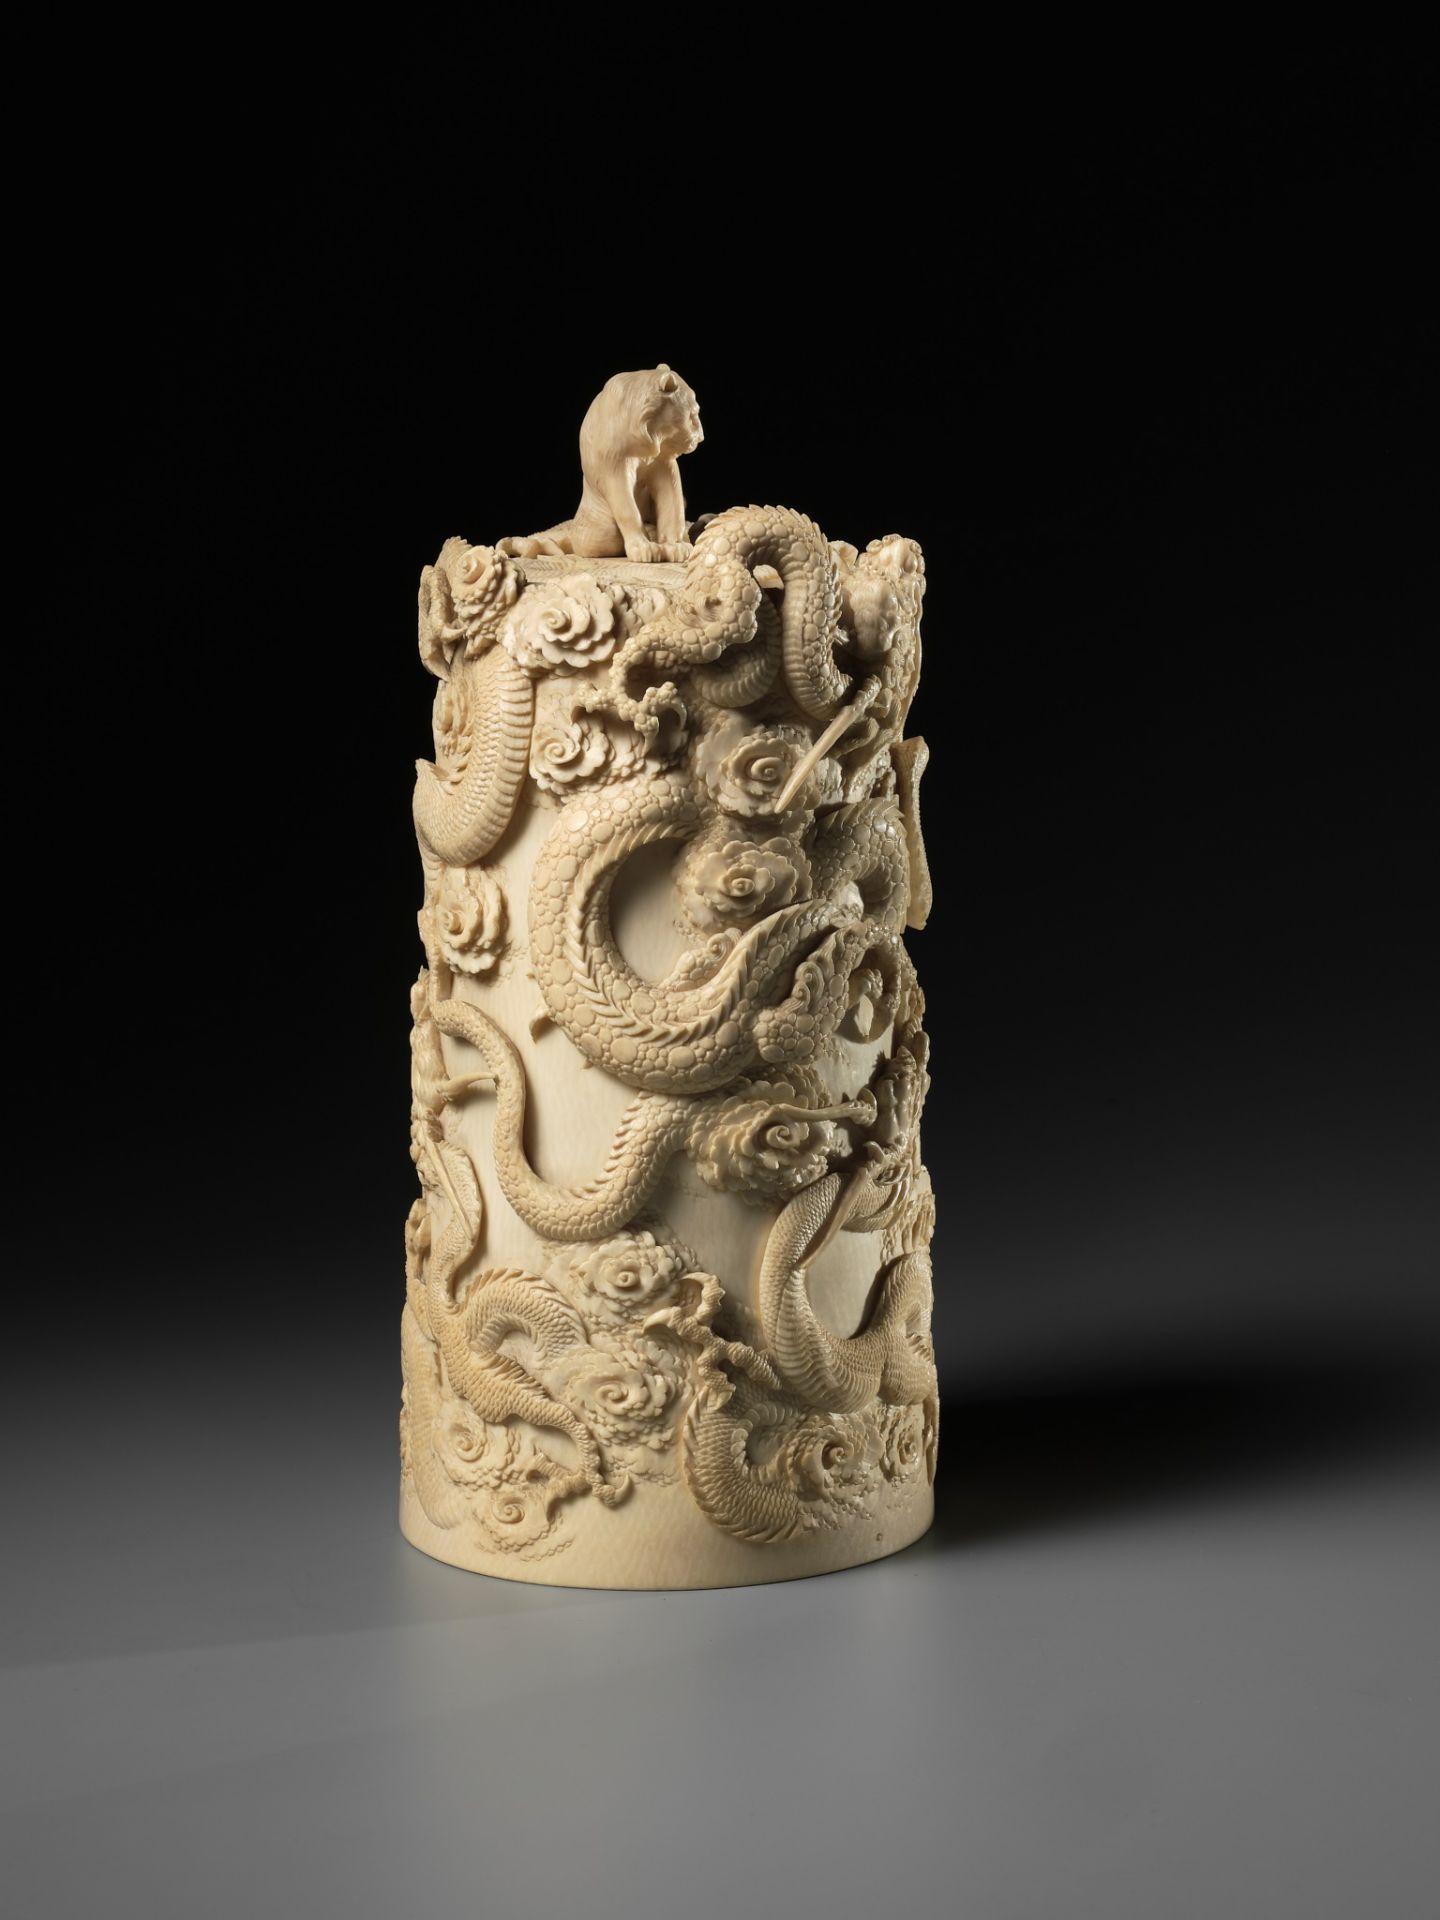 A SUPERB AND LARGE IVORY TUSK BOX AND COVER DEPICTING A TIGER AND DRAGONS - Image 8 of 13